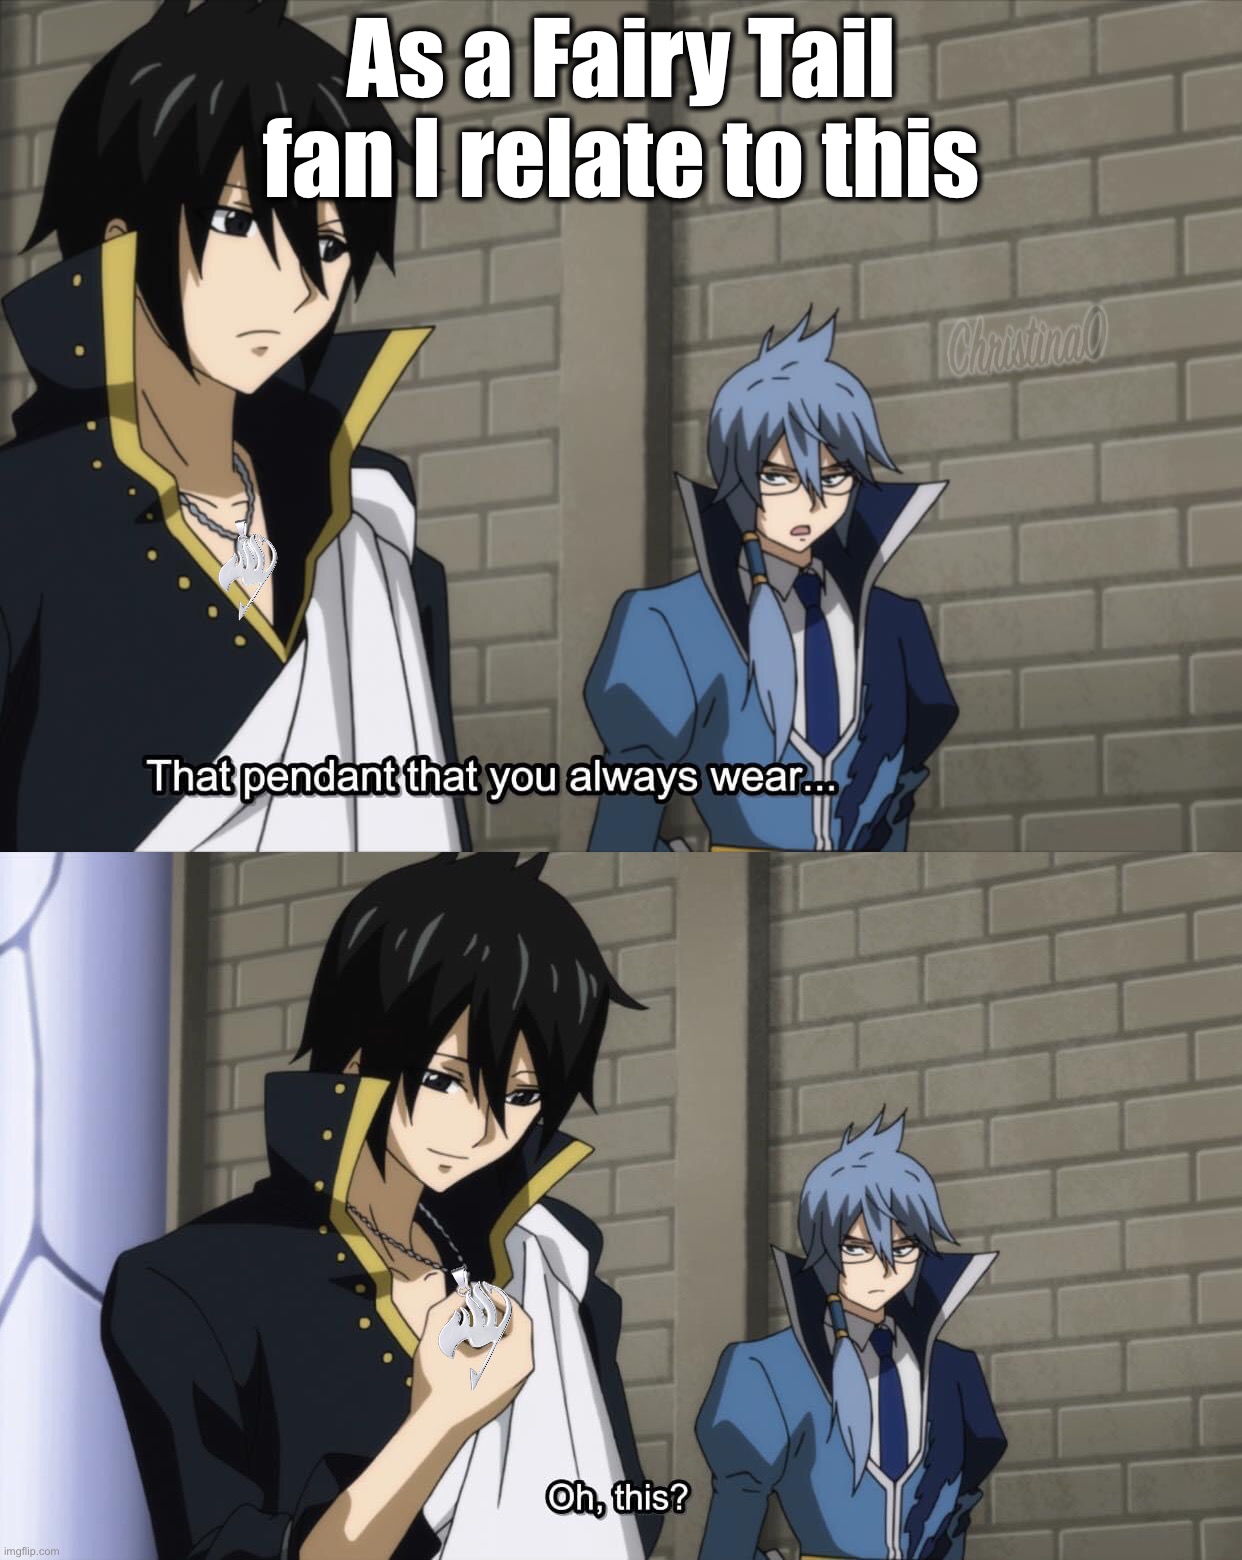 Fairy Tail Fans Meme | As a Fairy Tail fan I relate to this | image tagged in memes,fairy tail,fairy tail meme,anime meme,fans,merch | made w/ Imgflip meme maker